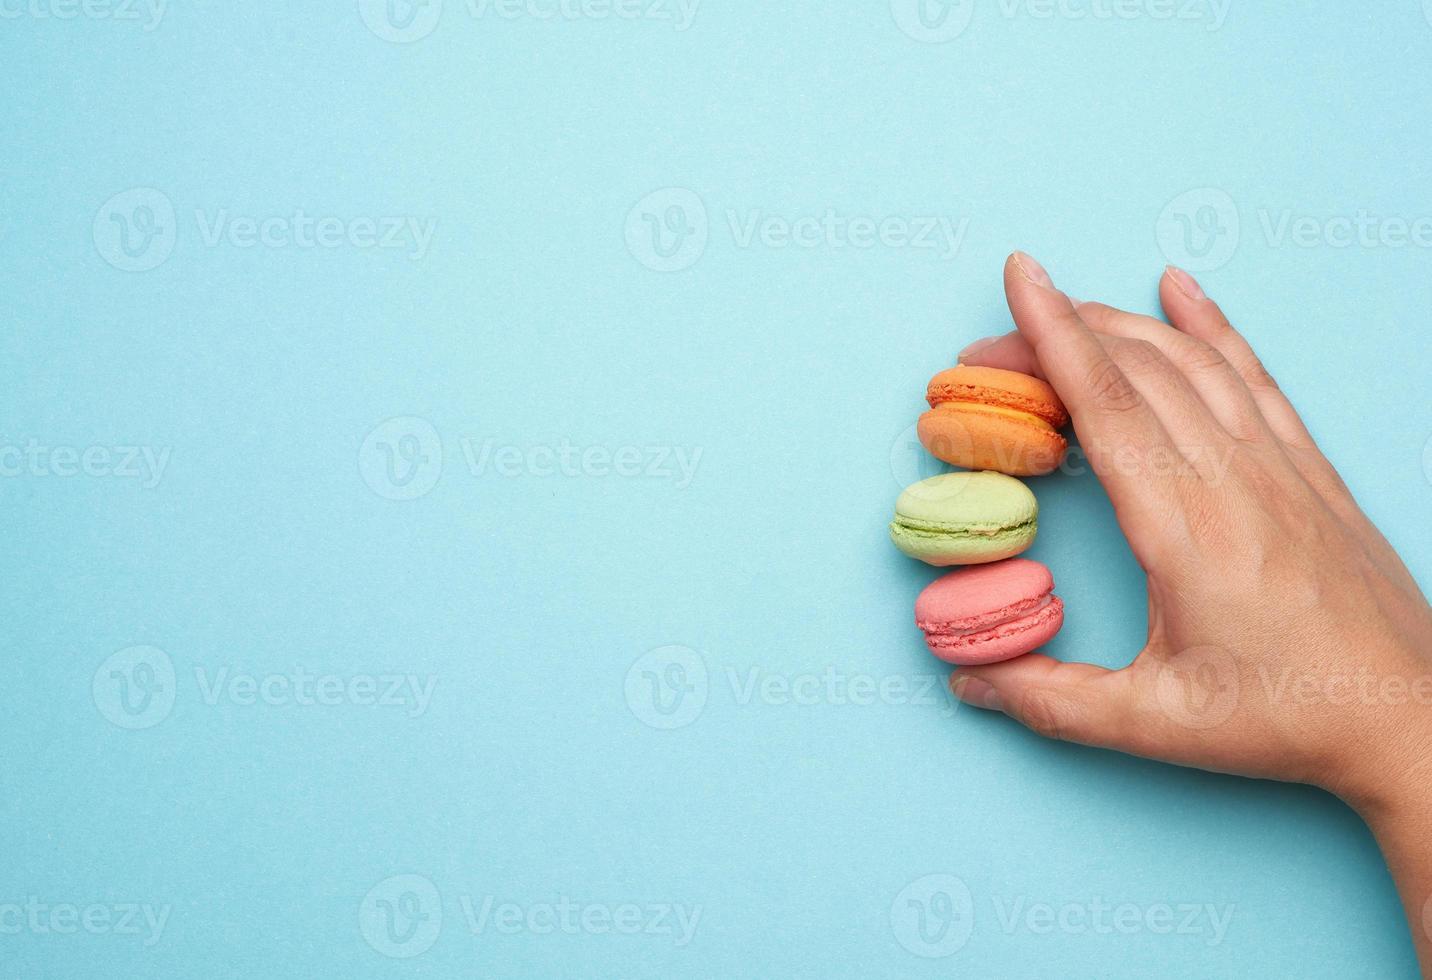 female hand holds three round baked macarons cookies on a blue background photo